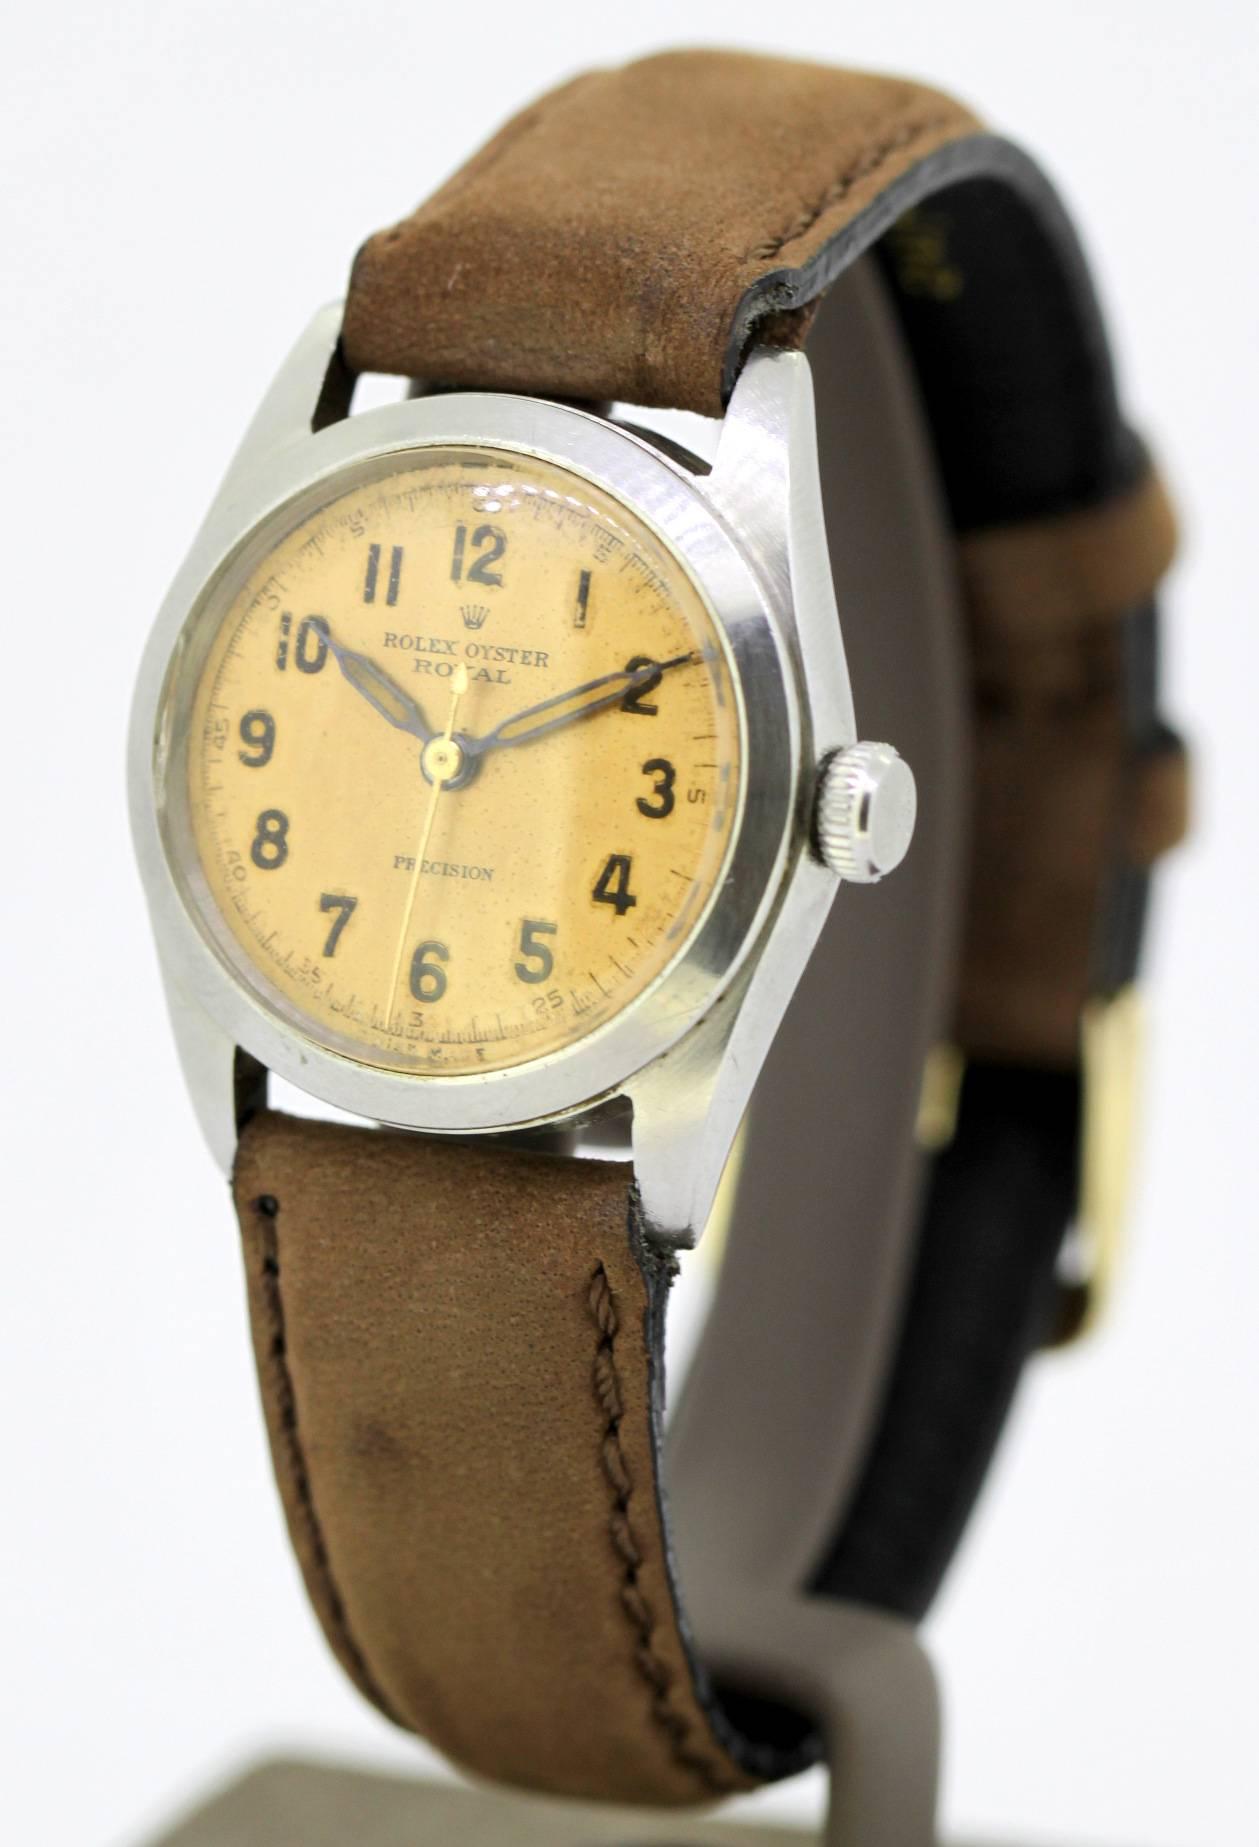 Vintage mens Rolex Oyster Royal manual winding wristwatch, Circa.1940's

Gender:	Mens Vintage
Model : Oyster Royal
Case Diameter : 29 mm
Movement: Manual Winding
Watchband Material: Leather
Case material : Stainless Steel
Display